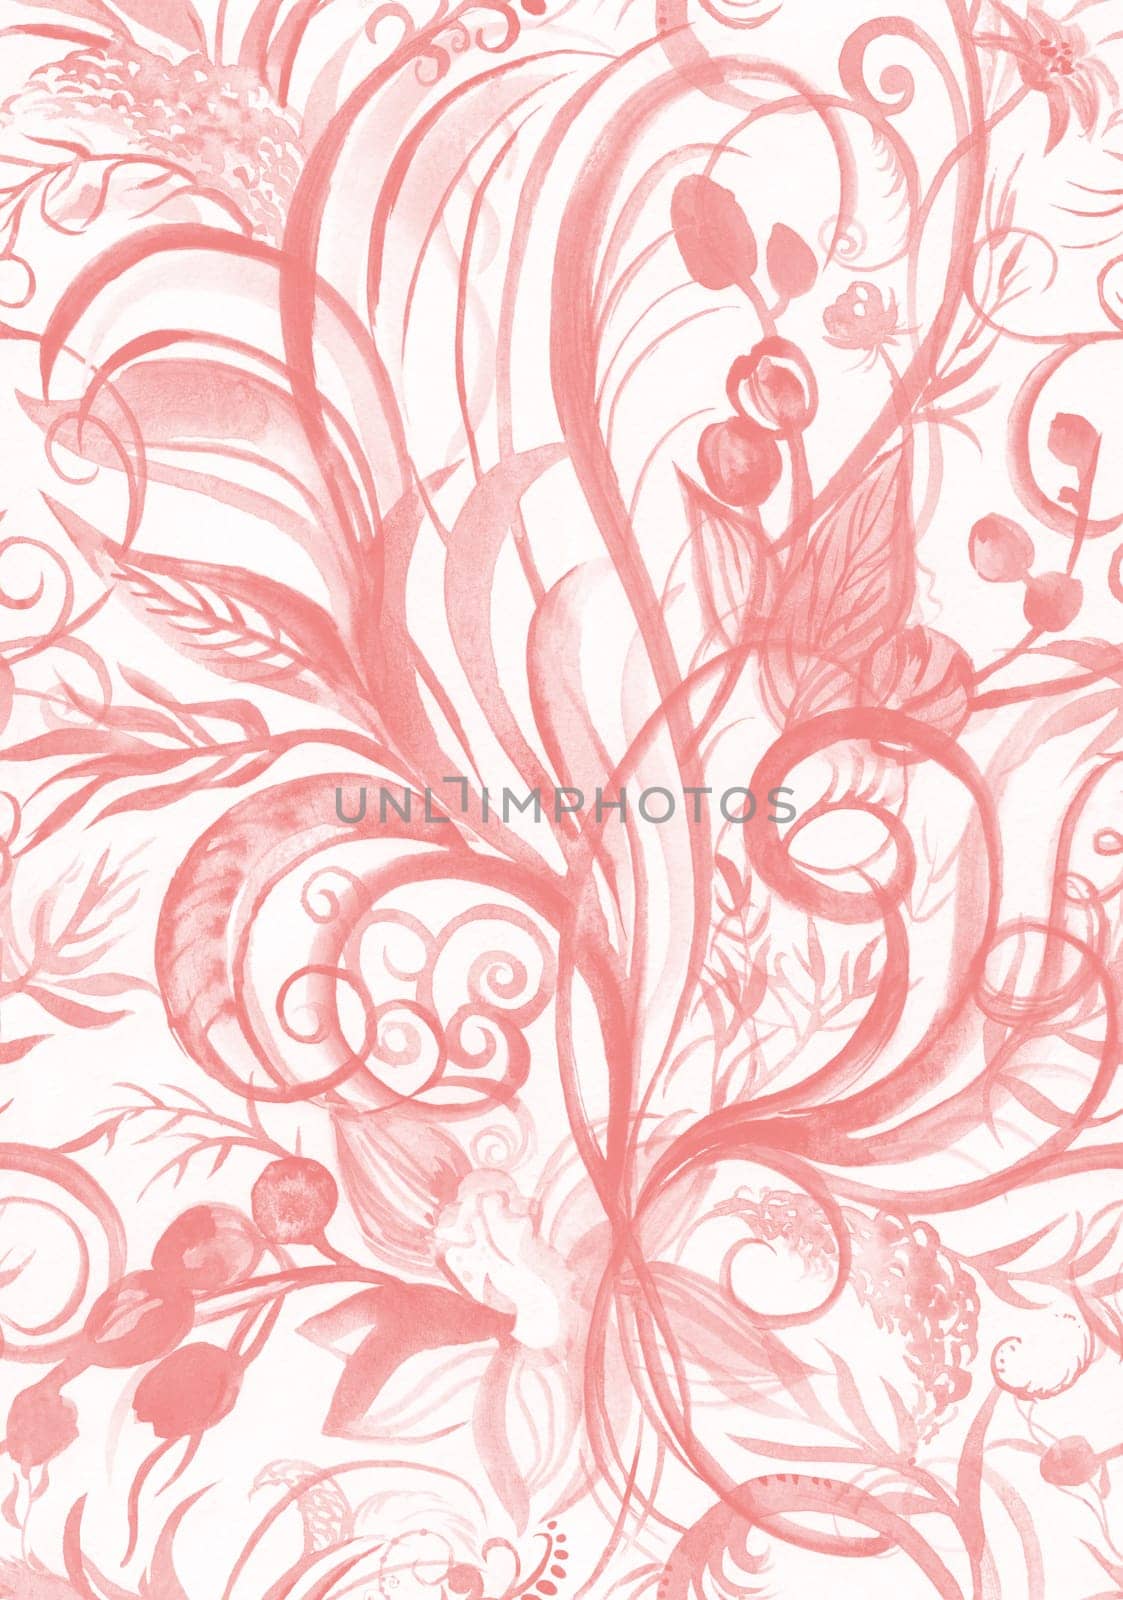 Botanical seamless pattern illustration with blooming red flower for textile and surface design